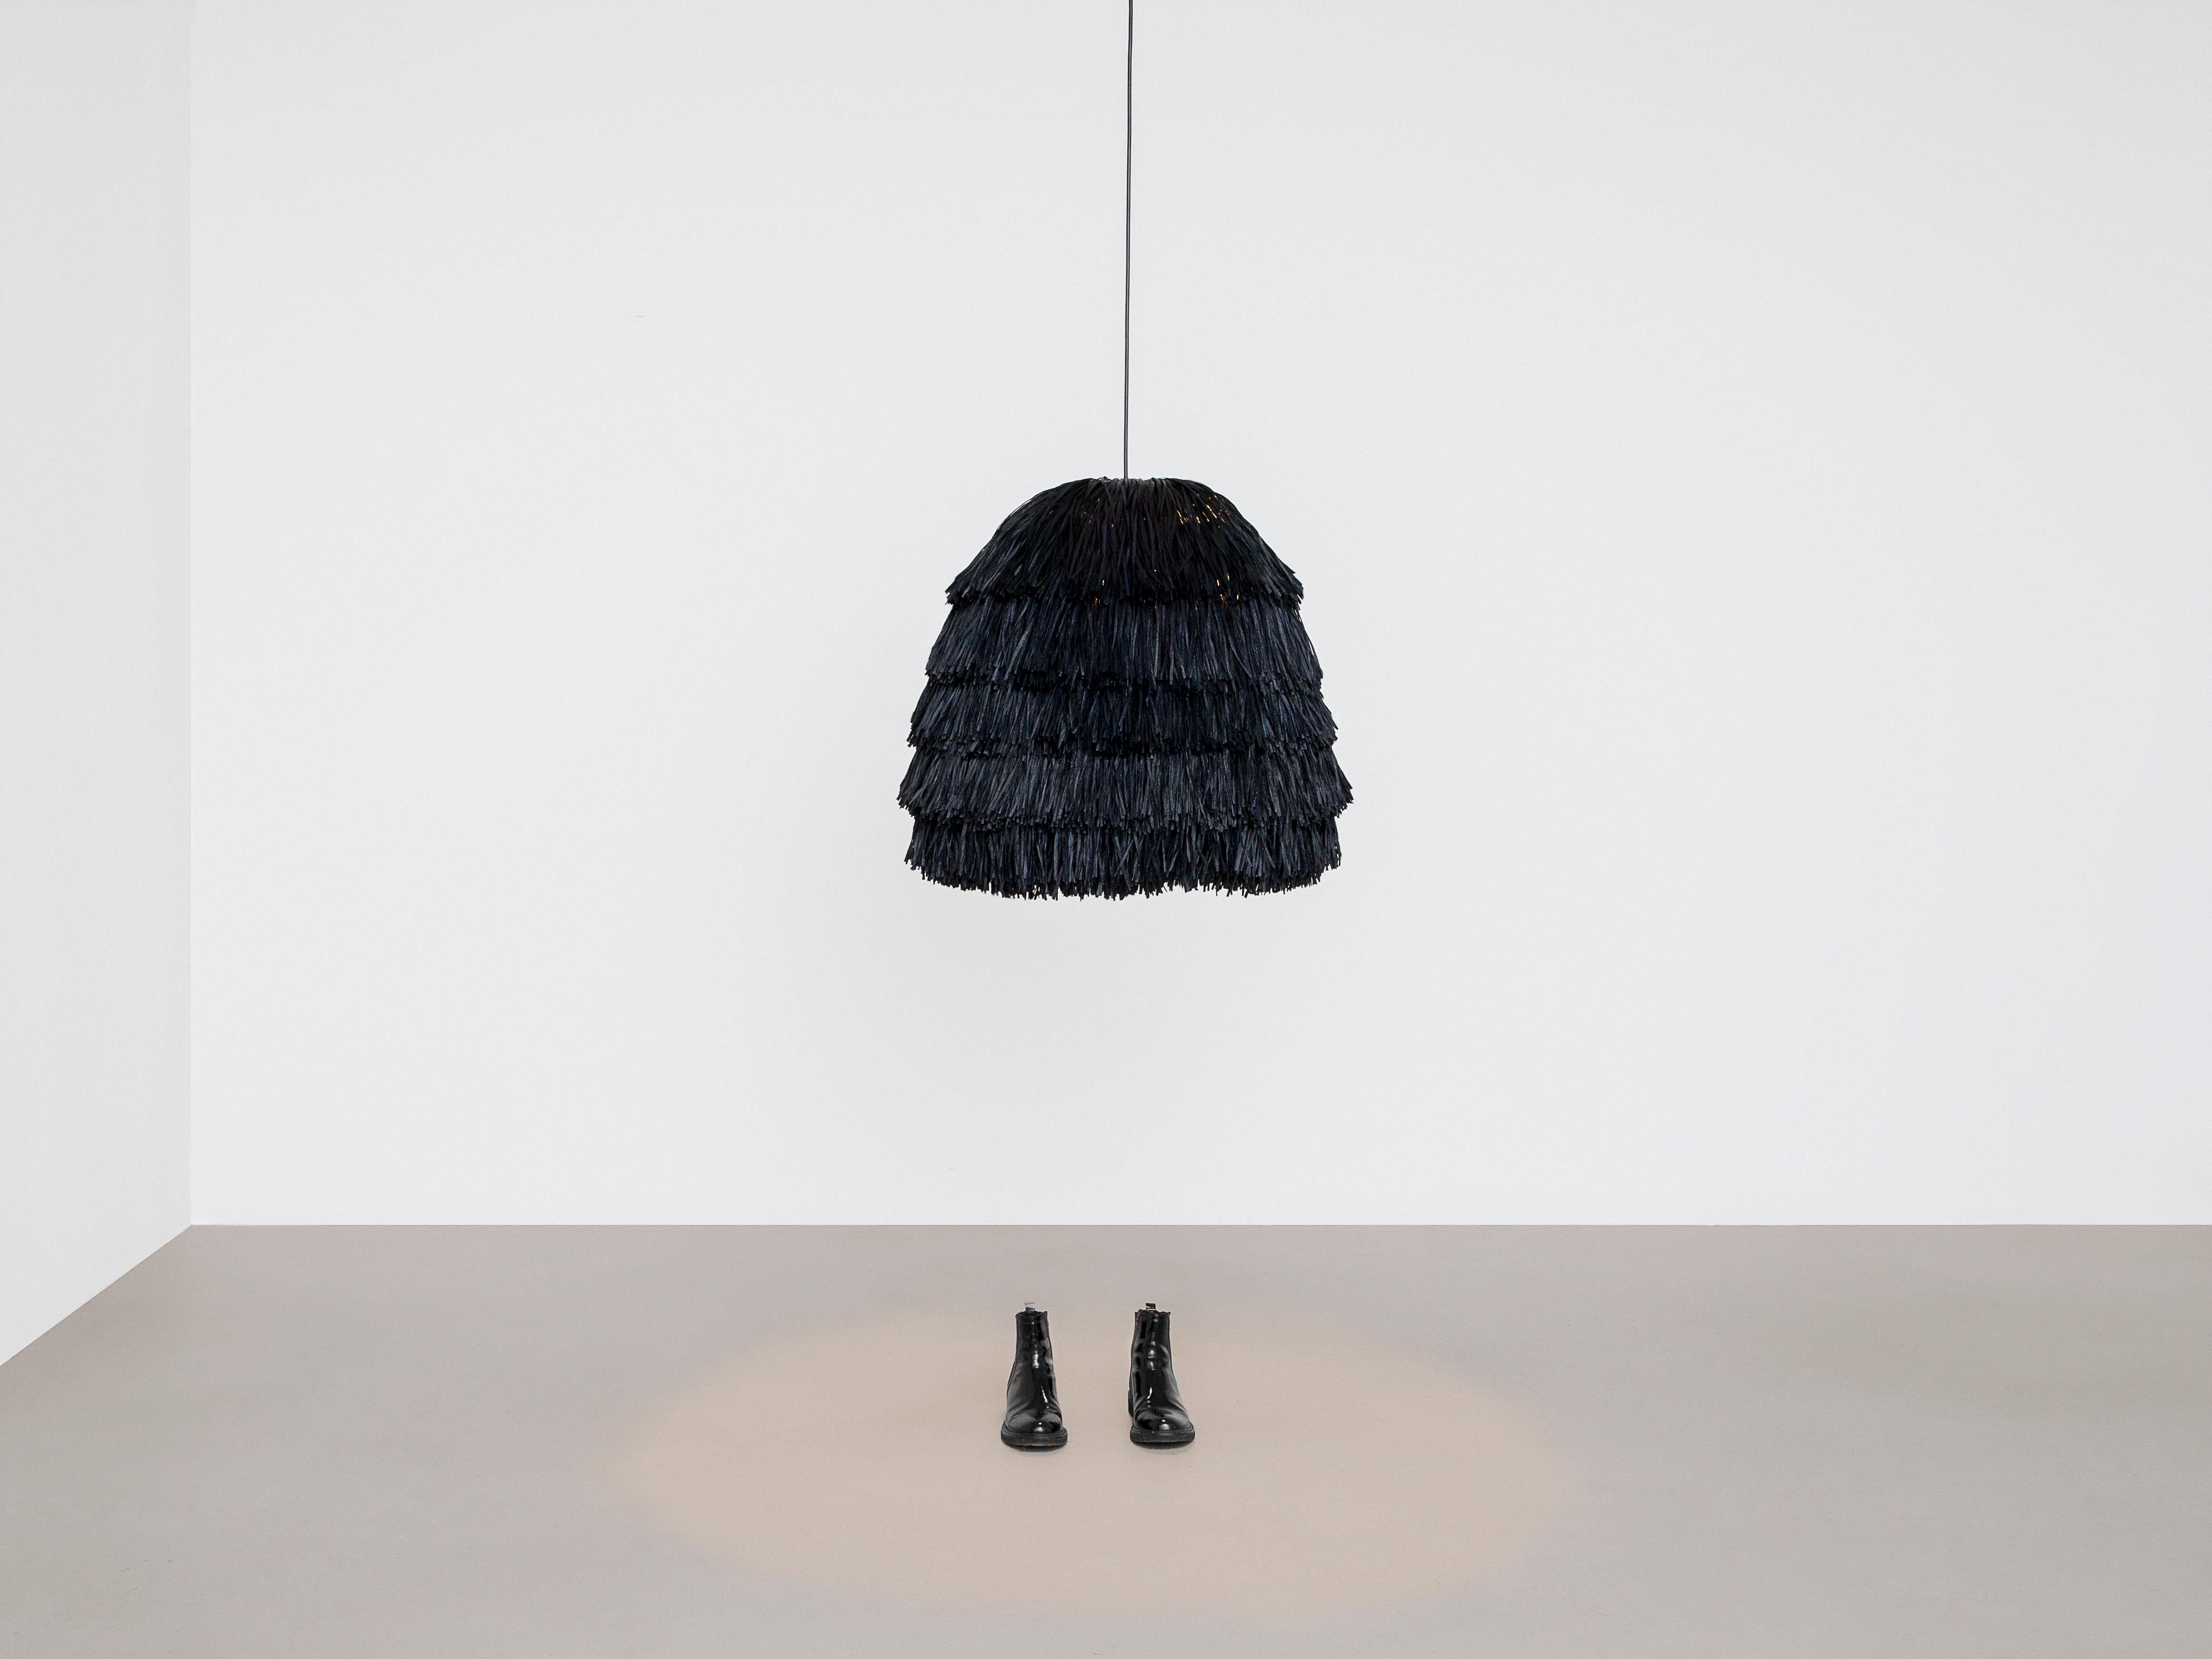 Black Fran XL lamp by Llot Llov
Handcrafted Light Object
Dimensions: Ø 65 cm x H: 70 cm
Materials: raffia fringes
Also available in green, red, black, beige 

With their bulky silhouette and rustling fringes, the FRAN lights are reminiscent of a